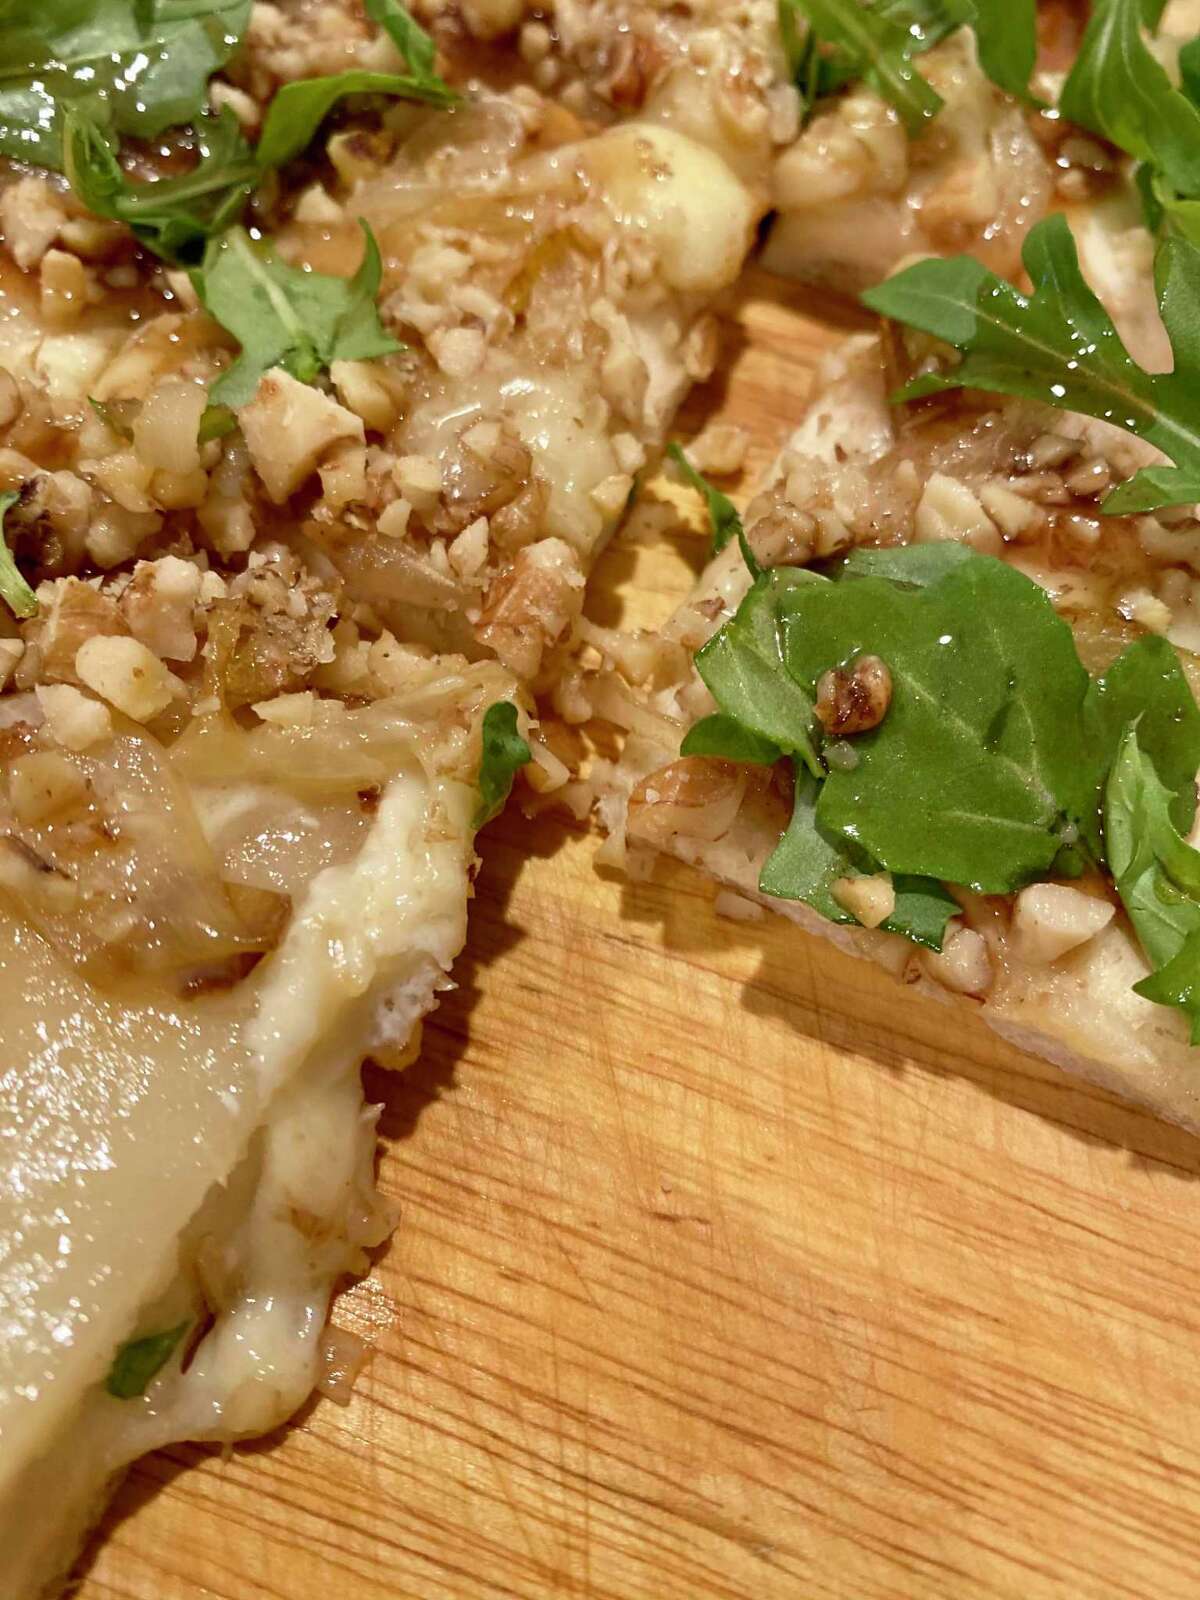 Looking to try something a little different? A pear flatbread makes for a light and refreshing dish.